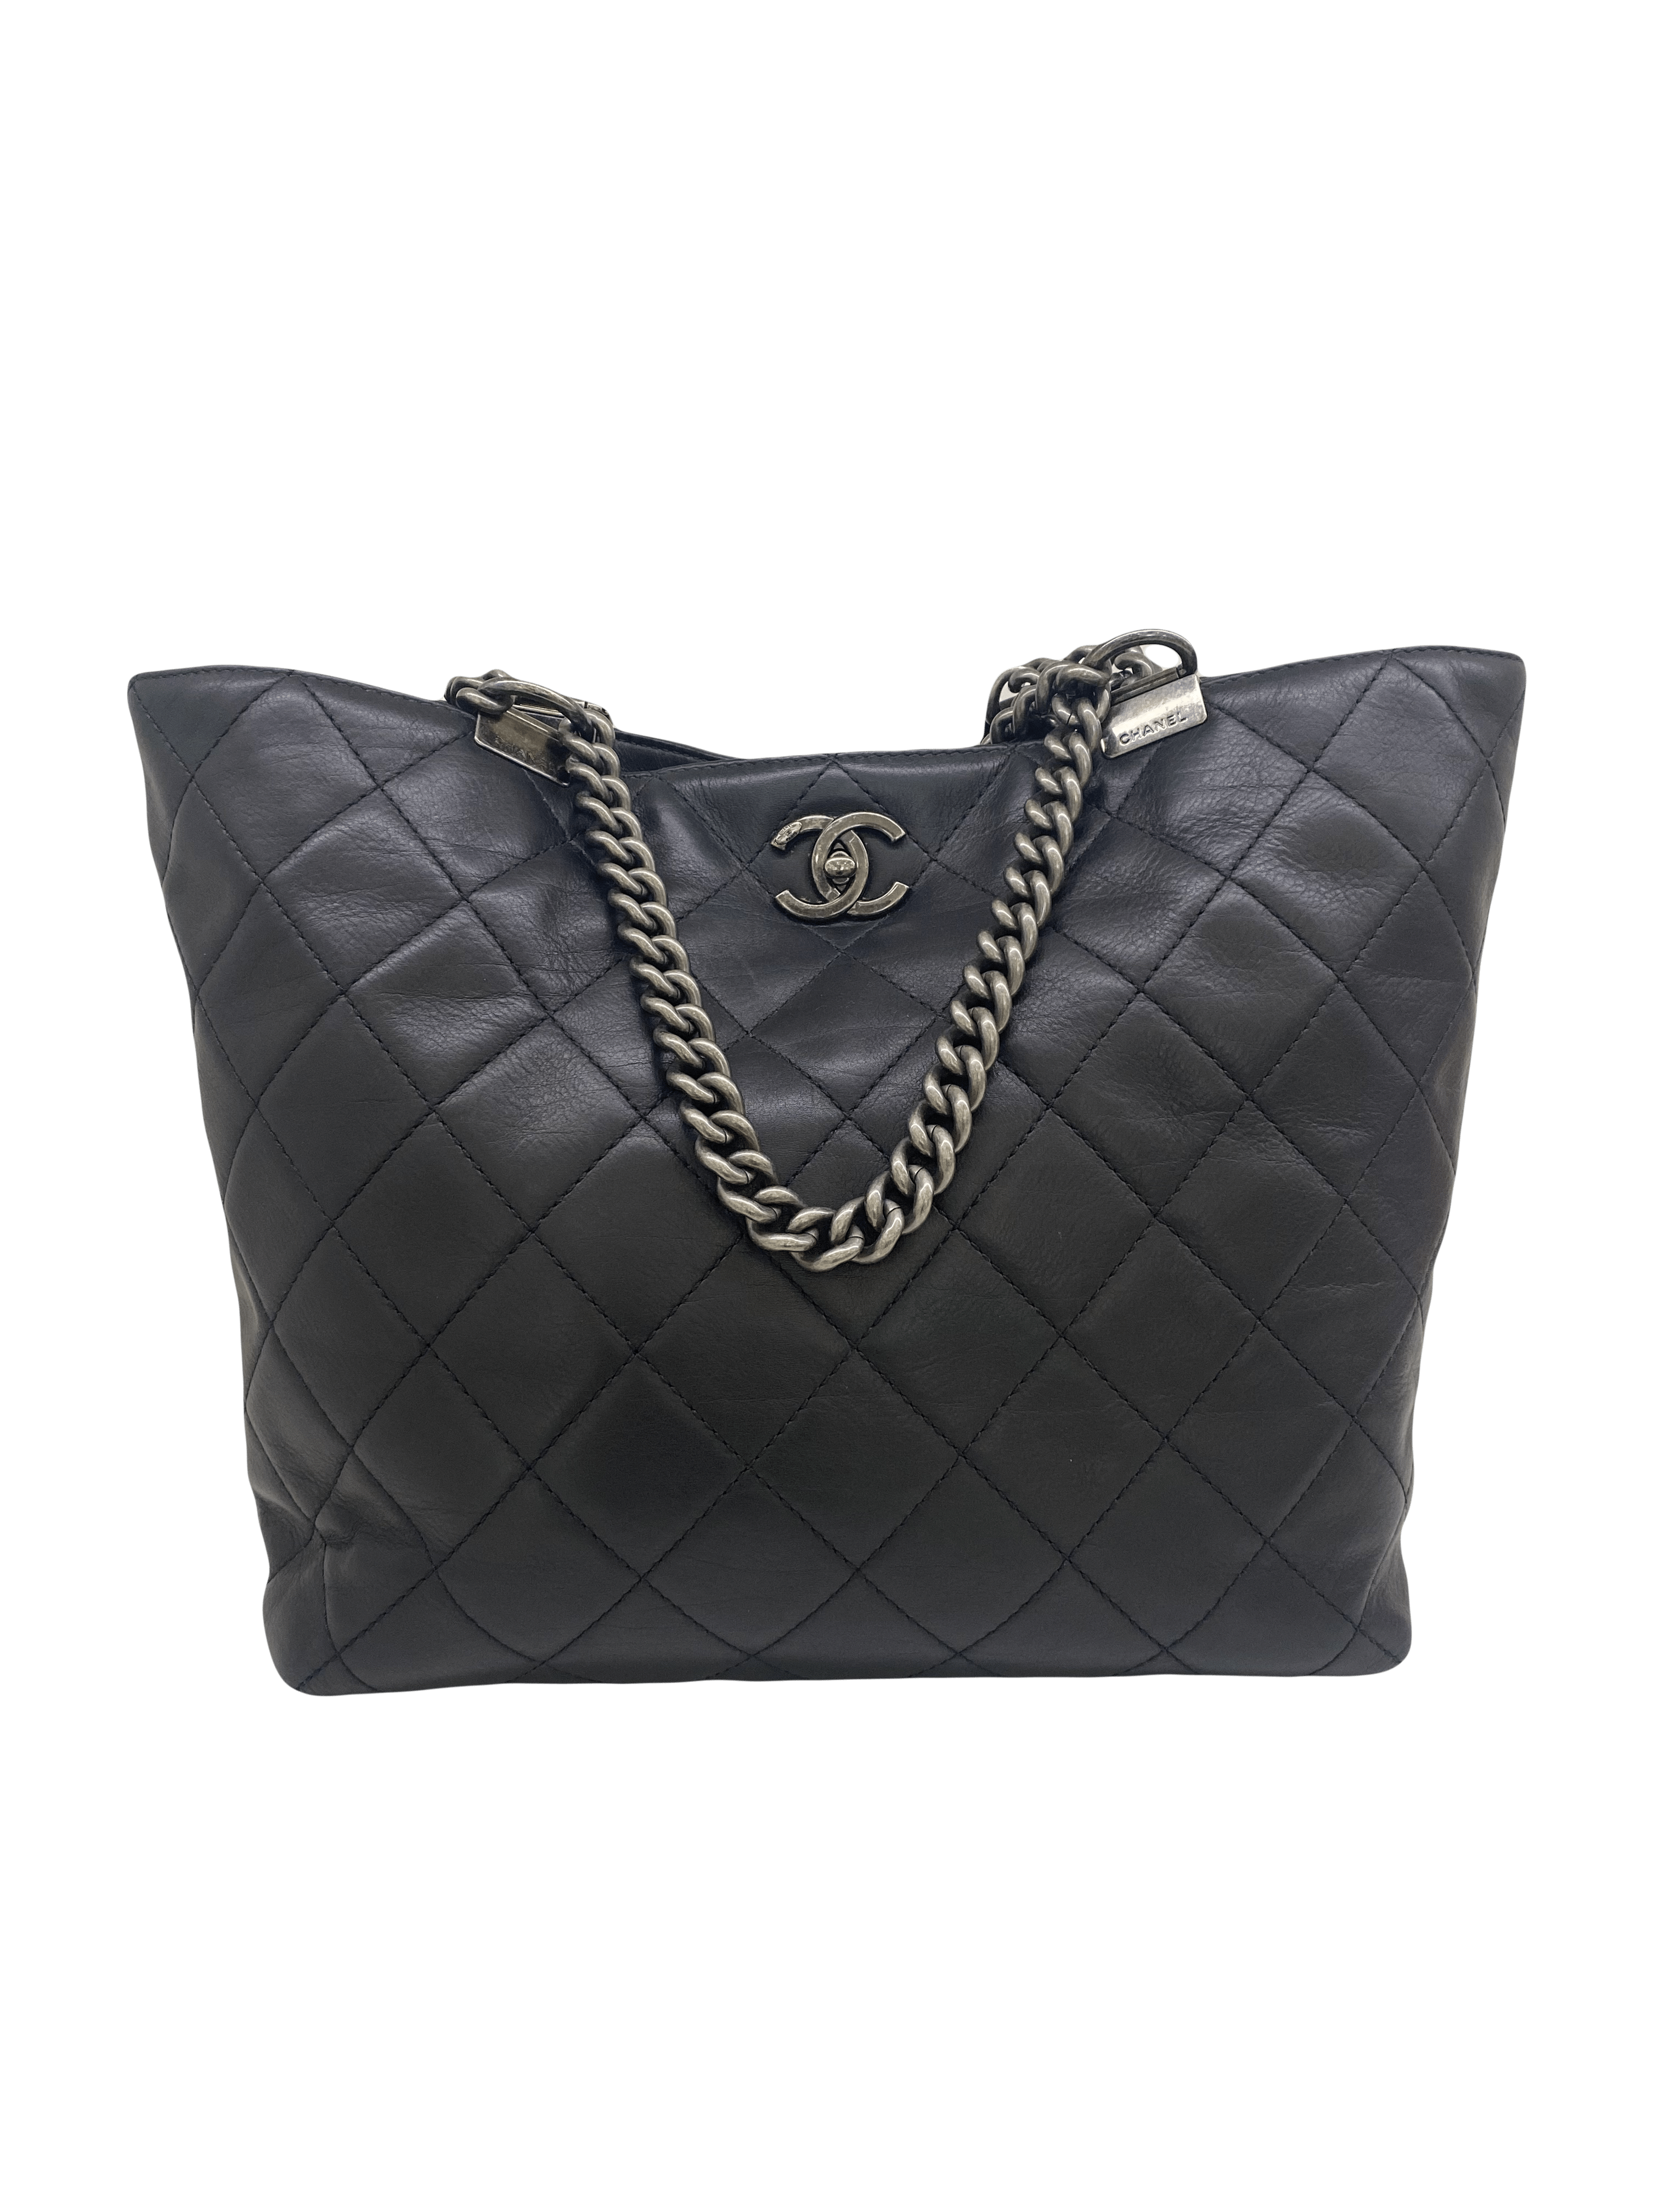 Chanel Shopping in Chains Tote Black